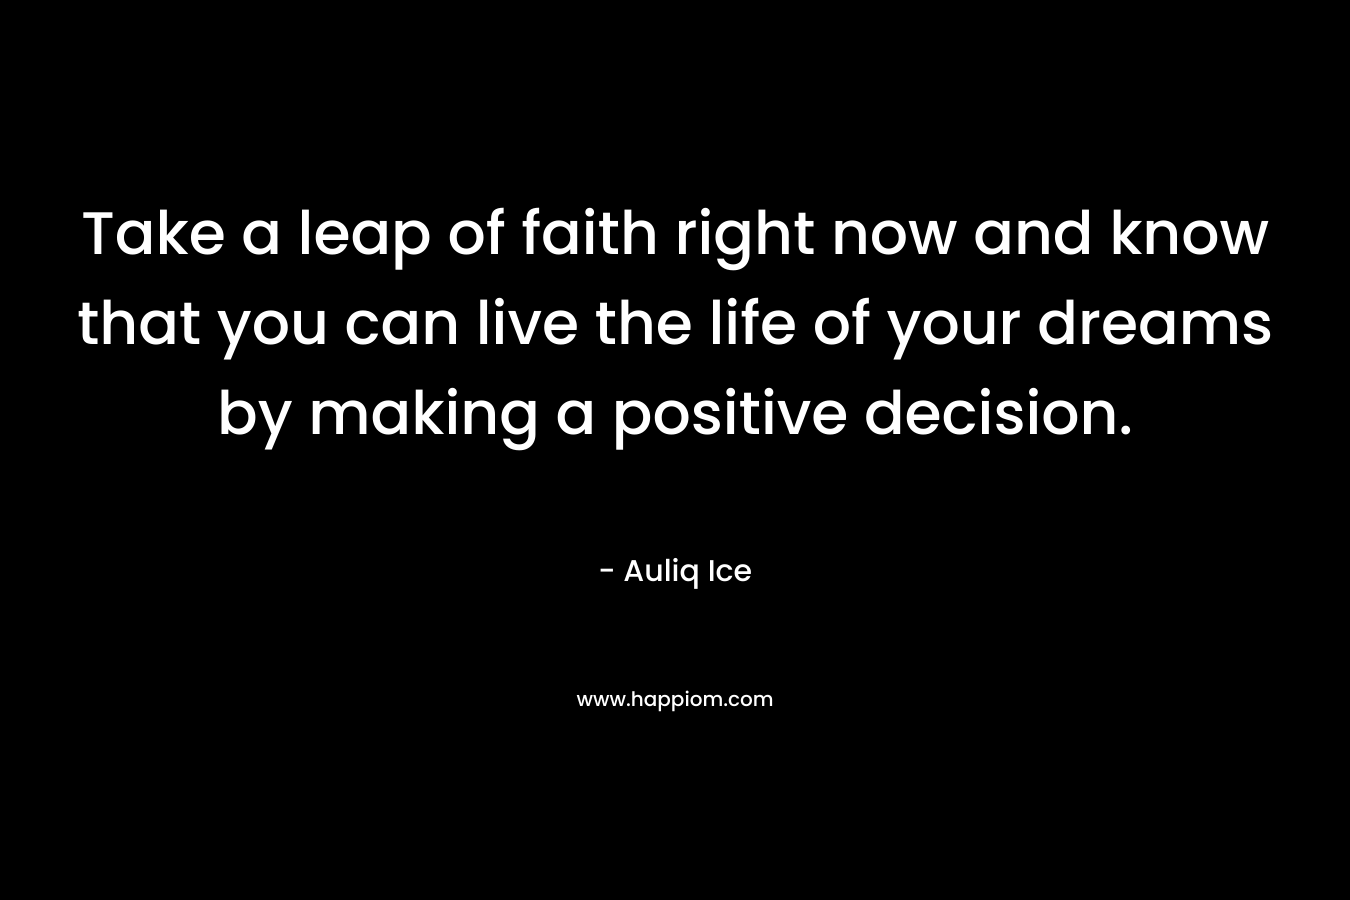 Take a leap of faith right now and know that you can live the life of your dreams by making a positive decision.